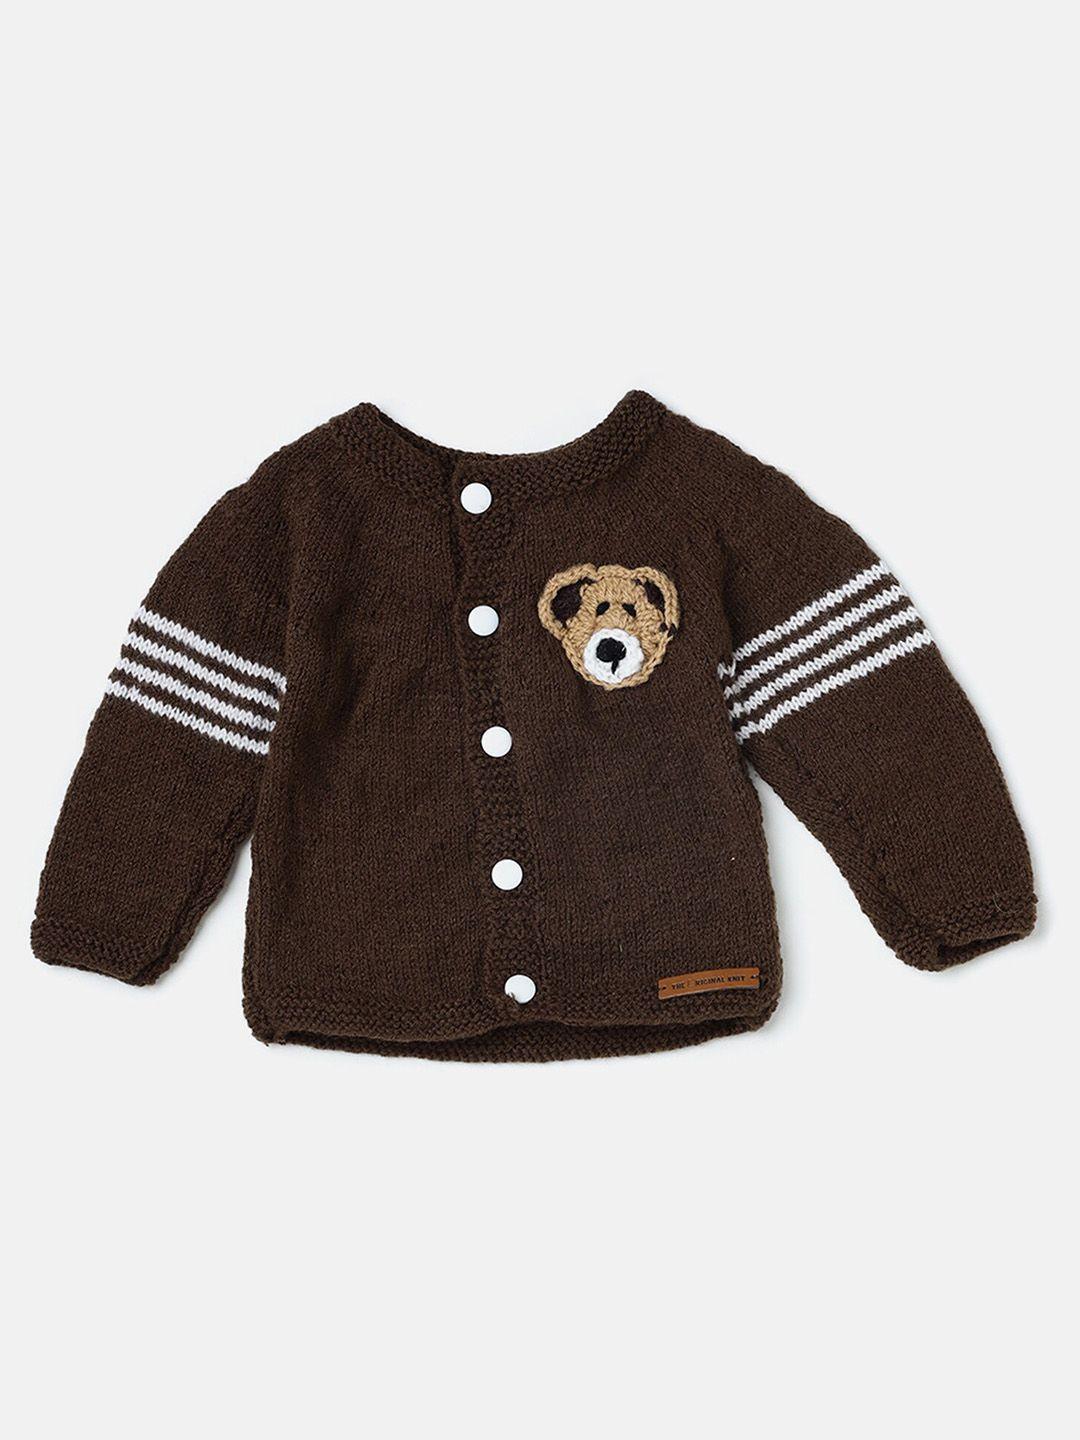 the-original-knit-unisex-kids-brown-&-white-embroidered-cardigan-with-embroidered-detail